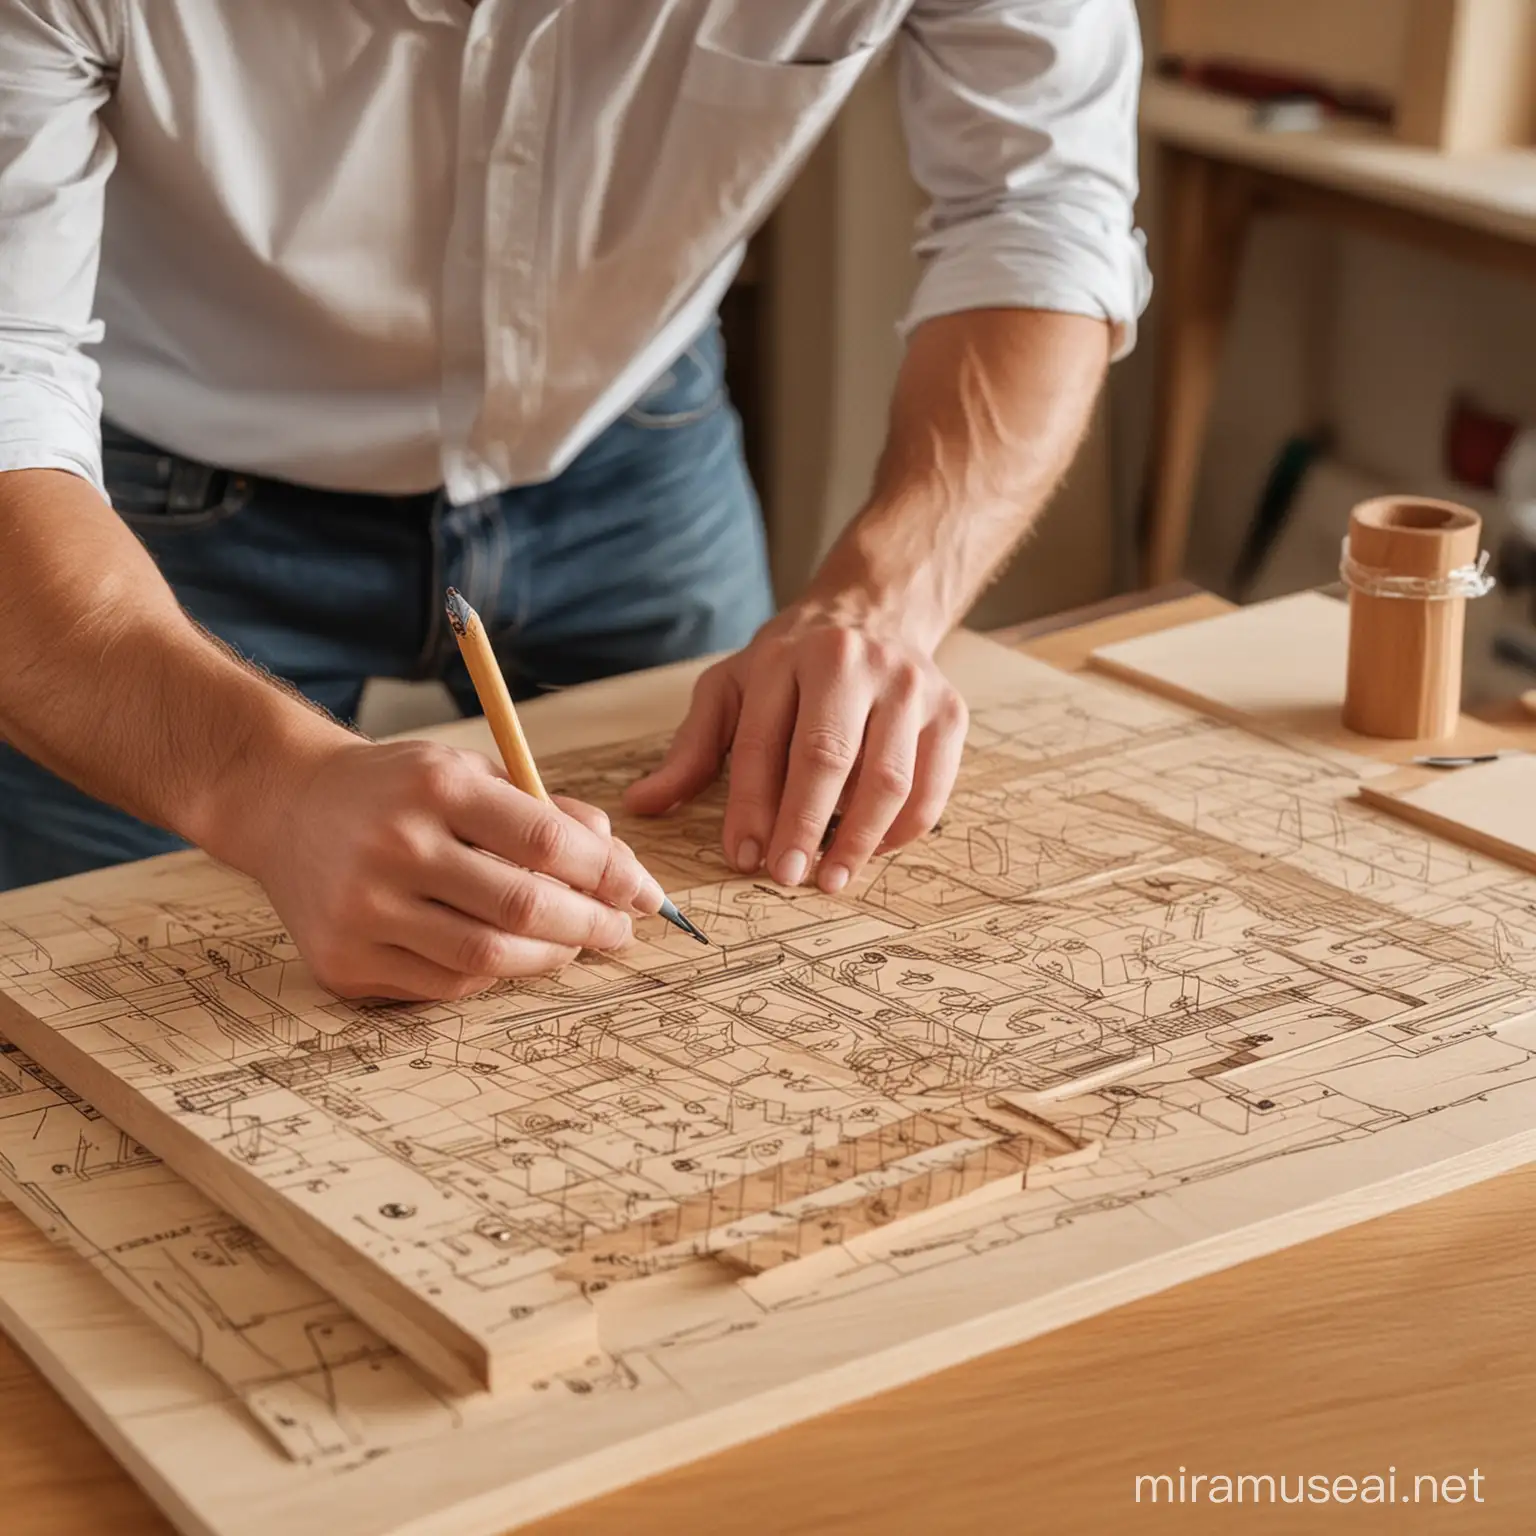 Craftsman Designing Woodworking Plans with Paper and Pencil